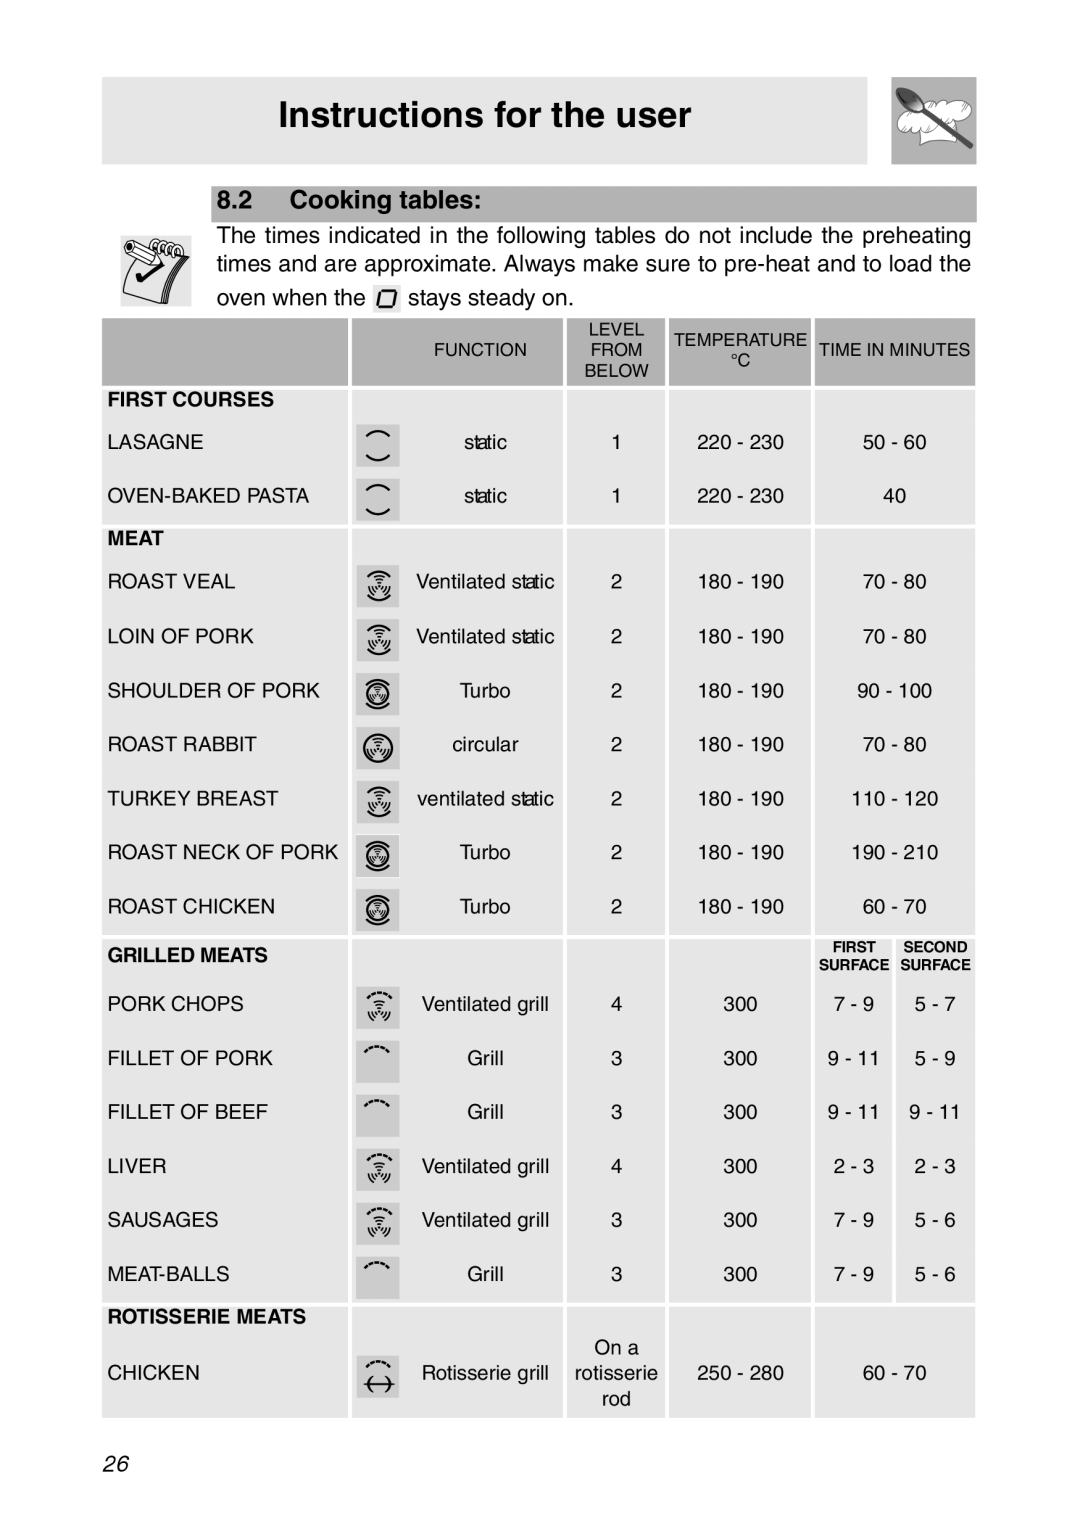 Smeg SC112 manual Cooking tables, Instructions for the user, First Courses, Grilled Meats, Rotisserie Meats 